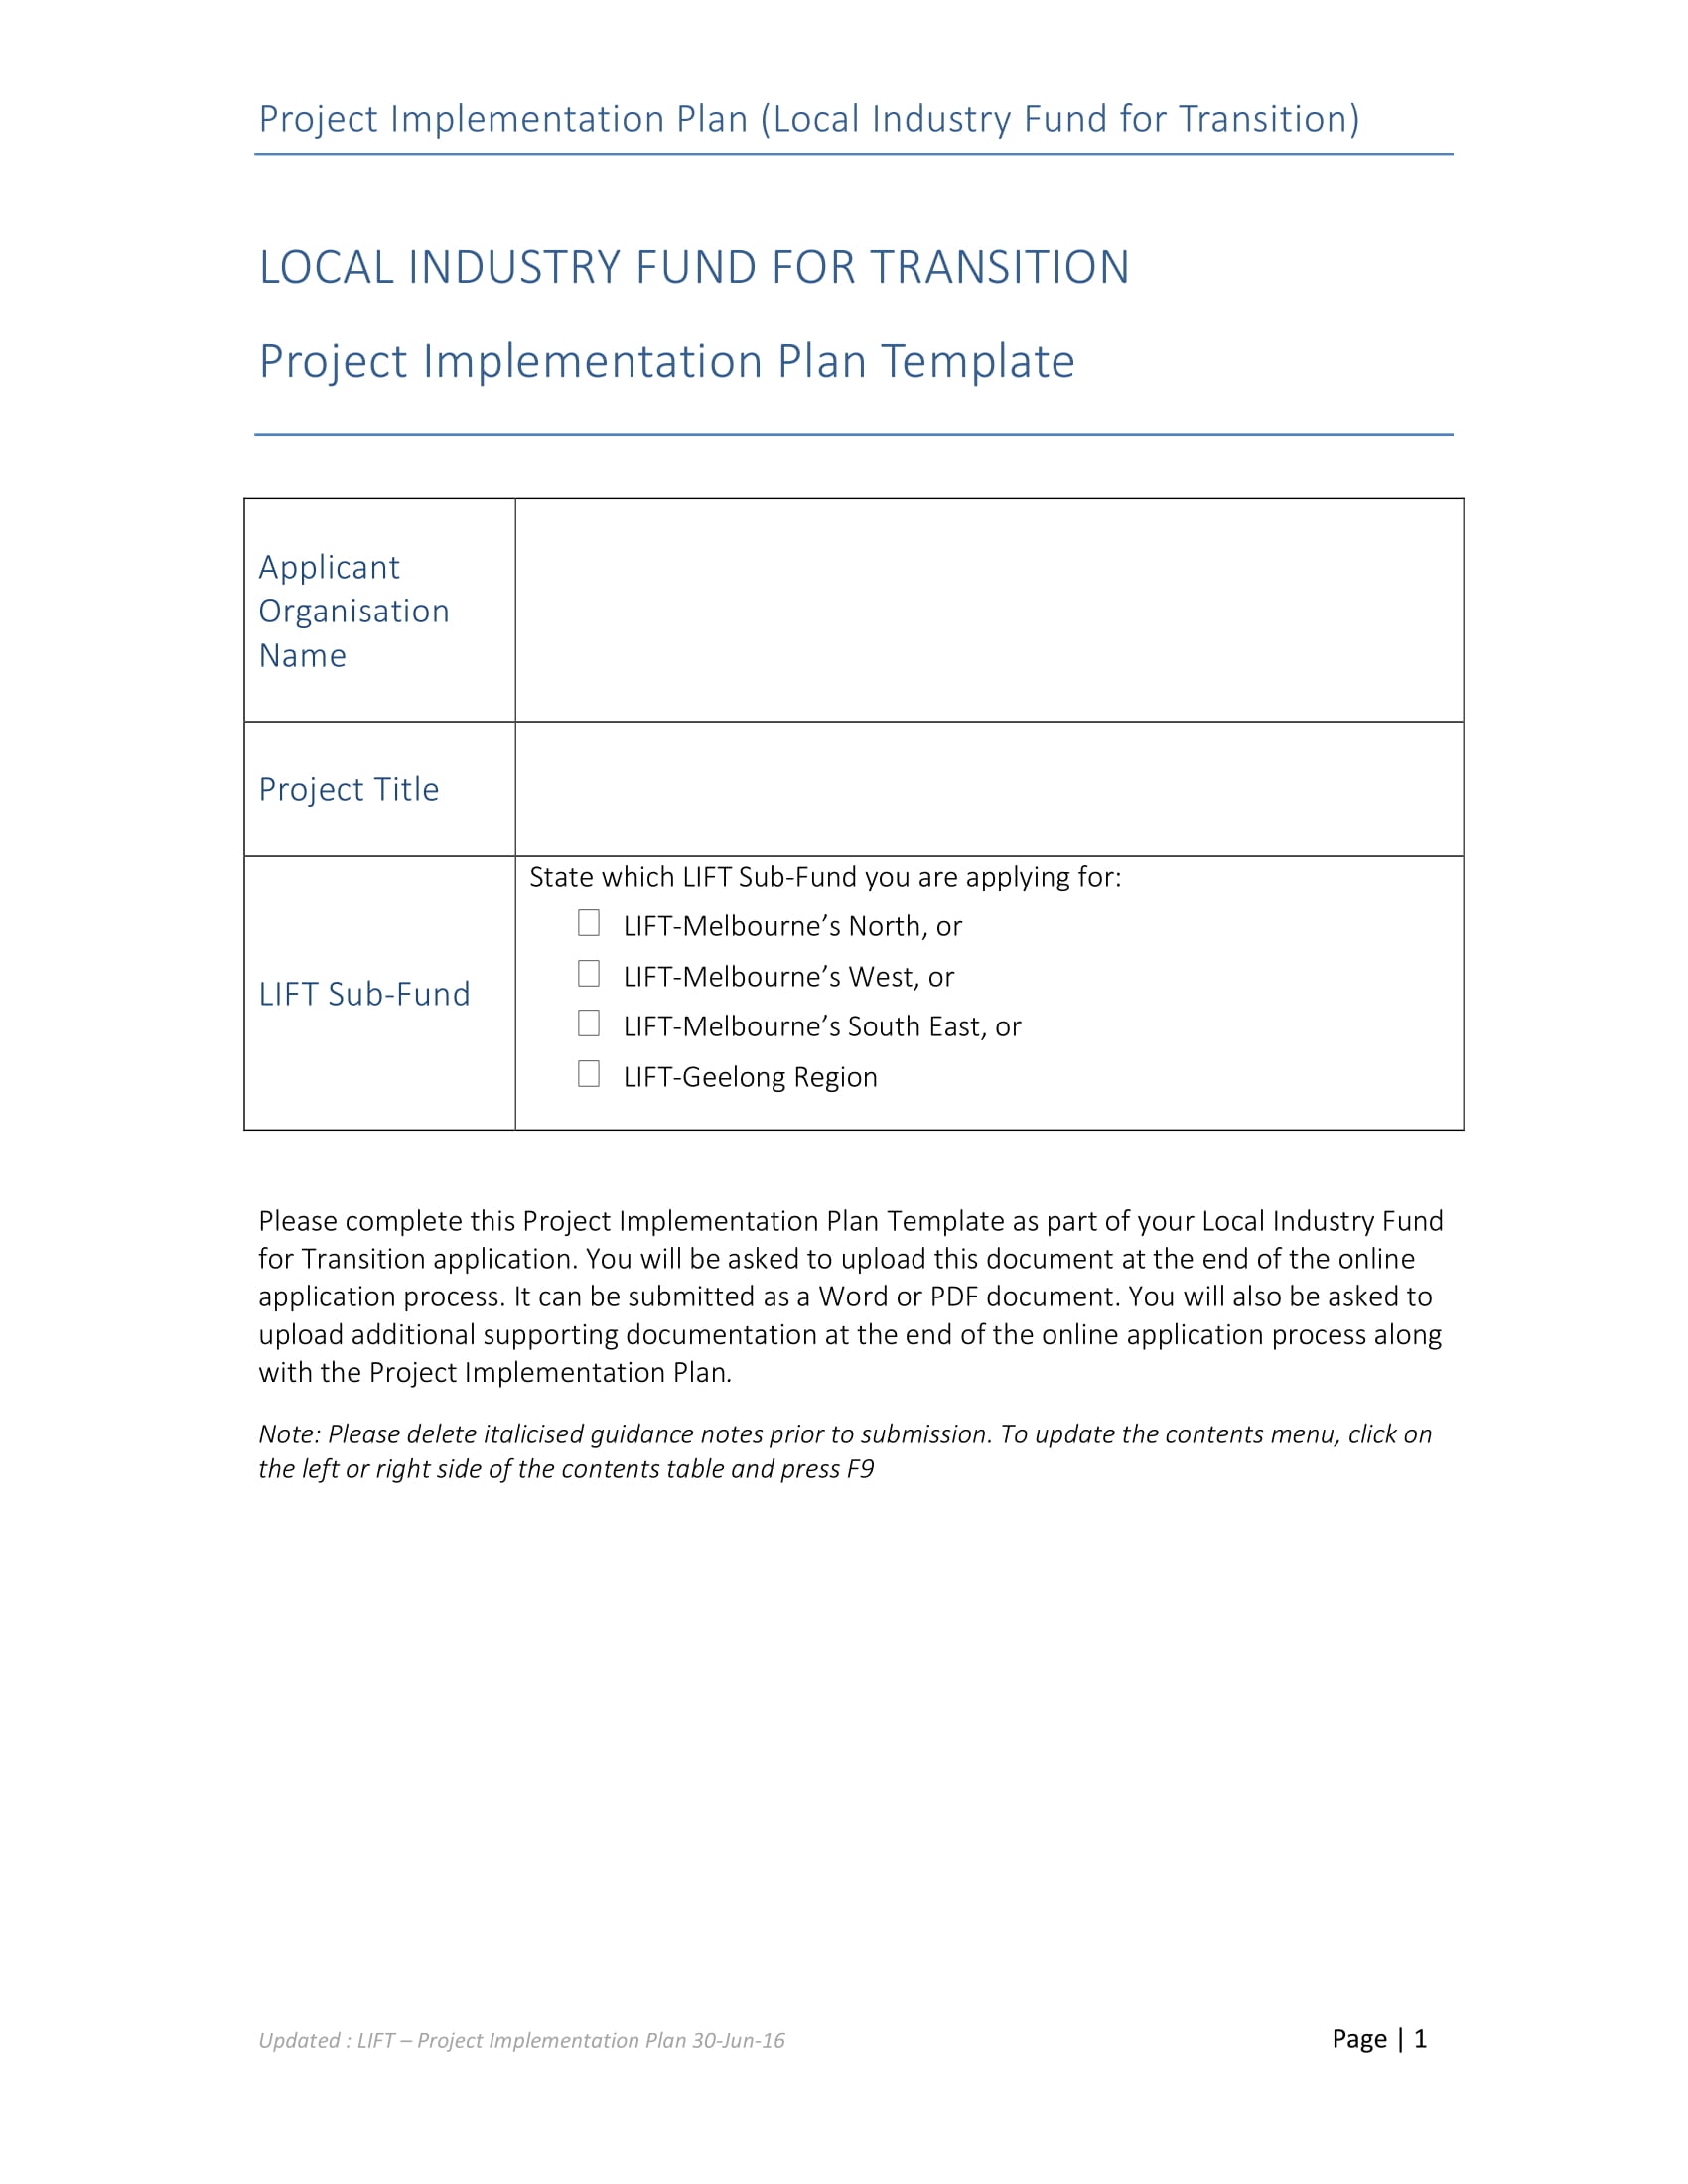 project implementation and management plan template example 01